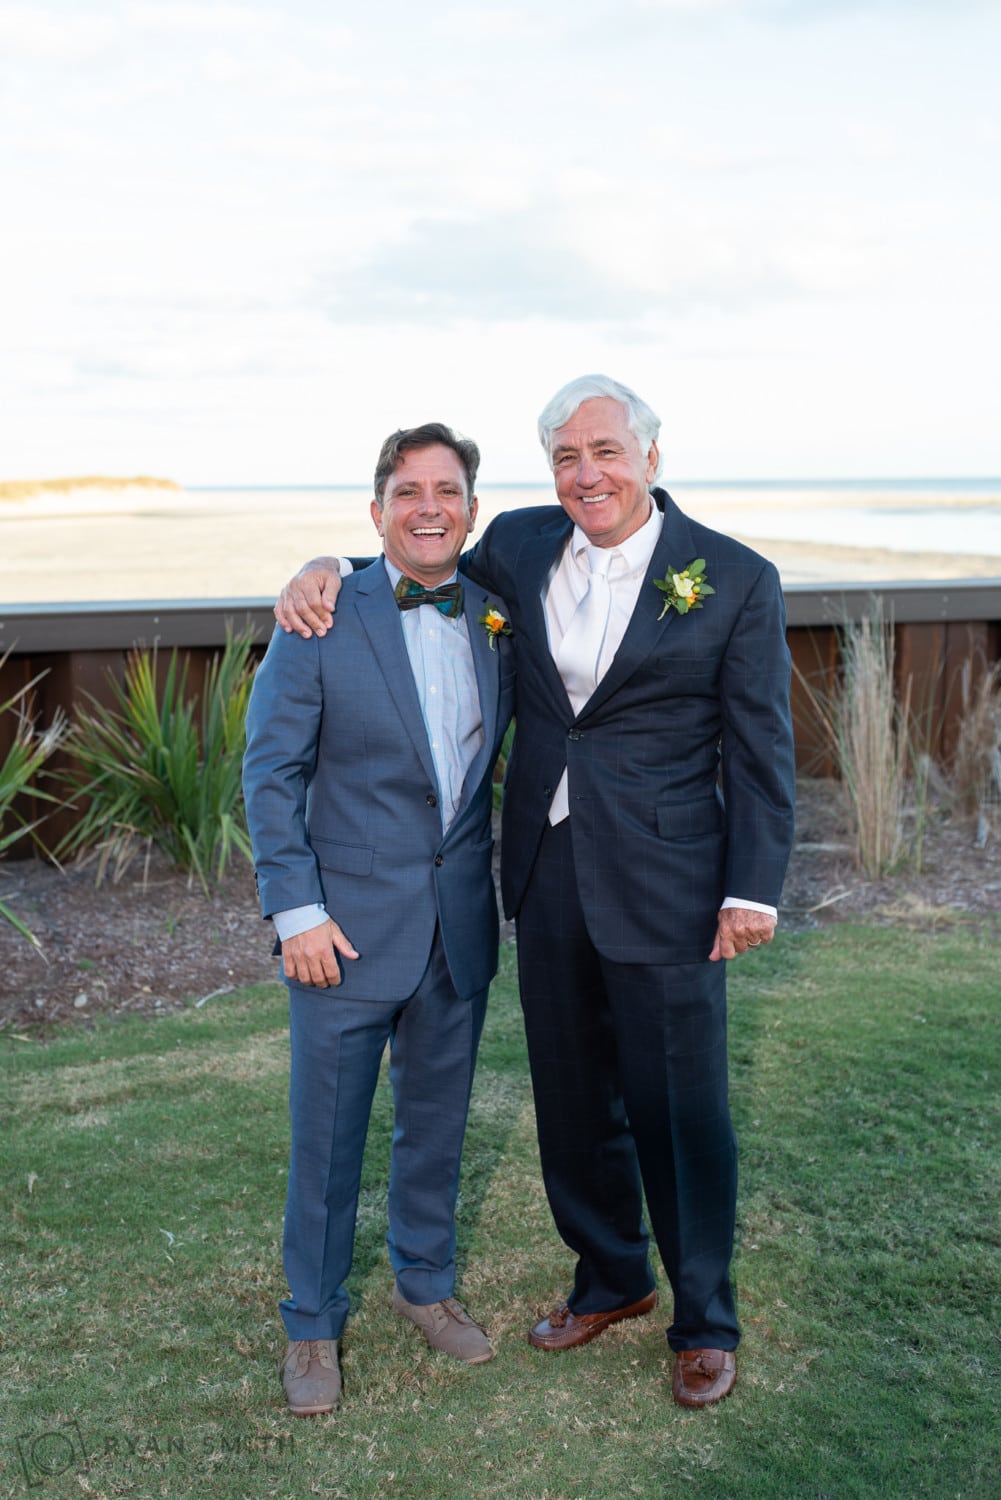 Groom with his son after the ceremony - Dunes Golf and Beach Club - Myrtle Beach